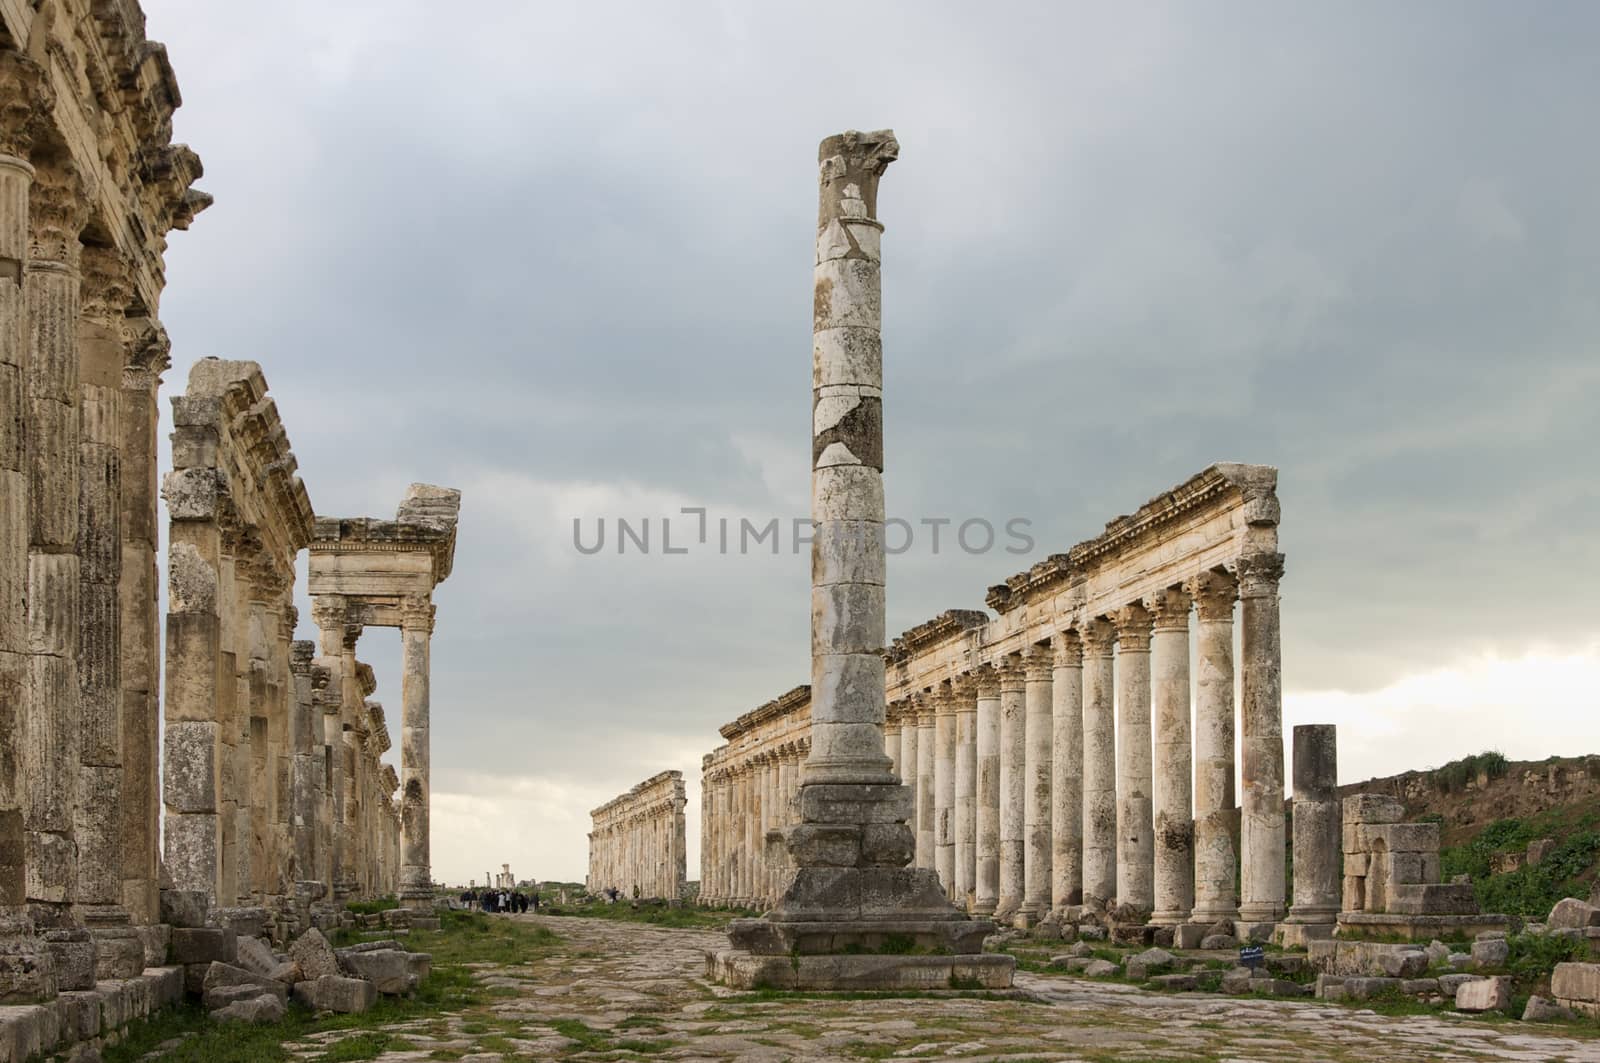 Apamea Syria, ancient ruins with famous colonnade before damage in the war by kgboxford